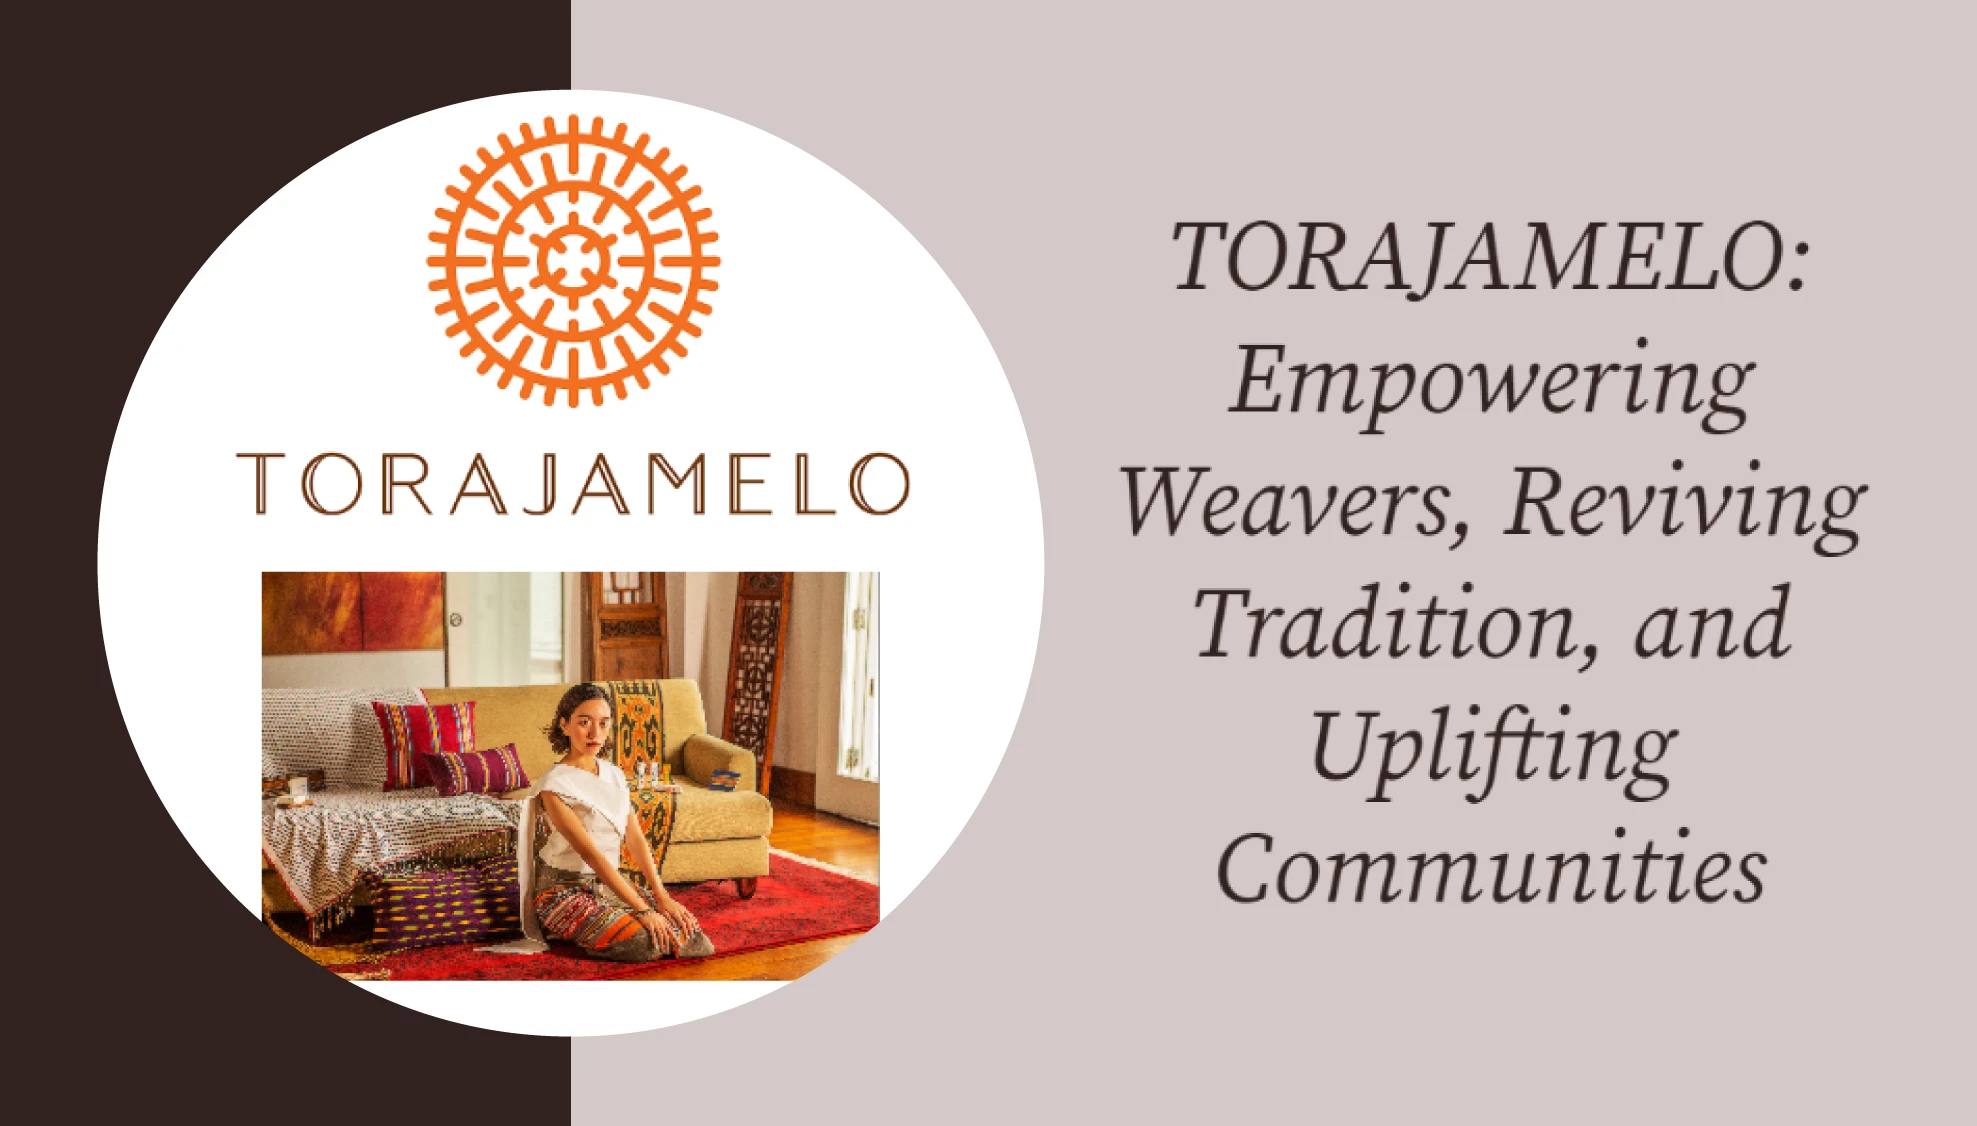 TORAJAMELO: Empowering Weavers, Reviving Tradition, and Uplifting Communities